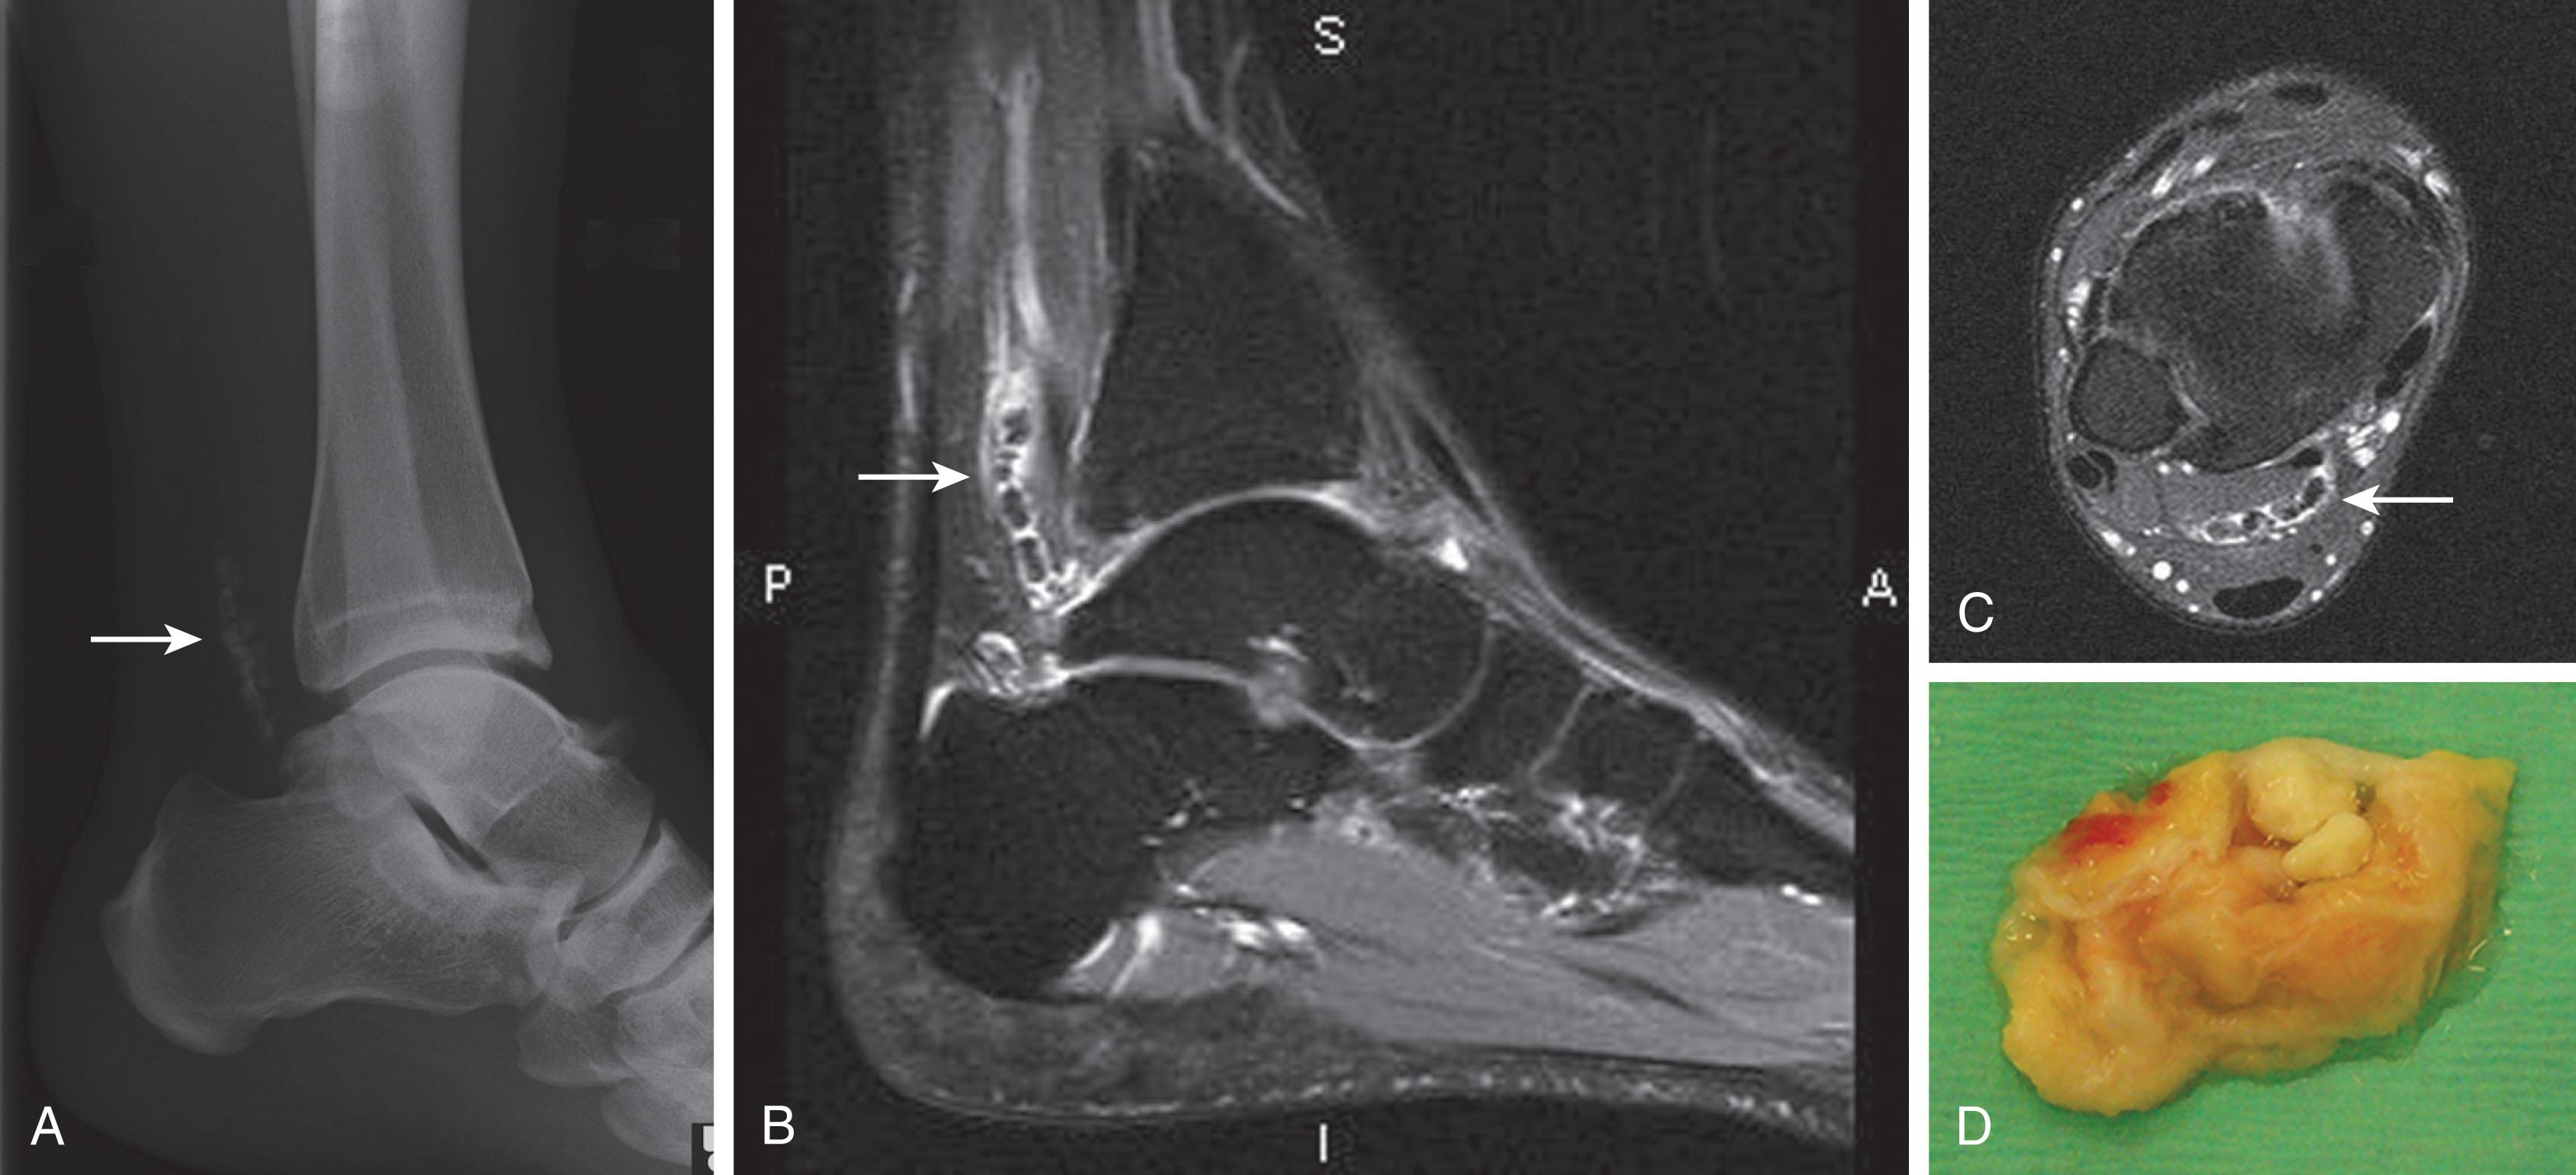 Fig. 28-43, Tenosynovial osteochondromatosis of the flexor hallucis longus tendon. A , Lateral radiograph of osteochondromal lesions ( arrow ). B , Fat-suppressed magnetic resonance image demonstrating multiple calcific nodules ( arrow ). C , Axial image showing multiple calcific nodules ( arrow ). D , Excised specimen containing multiple osteochondromatous nodules. ( A – C , From Oakley J, Yewlett A, Makwana N: Tenosynovial osteochondromatosis of the flexor hallucis longus tendon, Foot Ankle Surg 16:148–150, 2010. Used with permission. D , Courtesy J. Oakley, MRCS Ed, MBBCH, Shropshire, United Kingdom.)